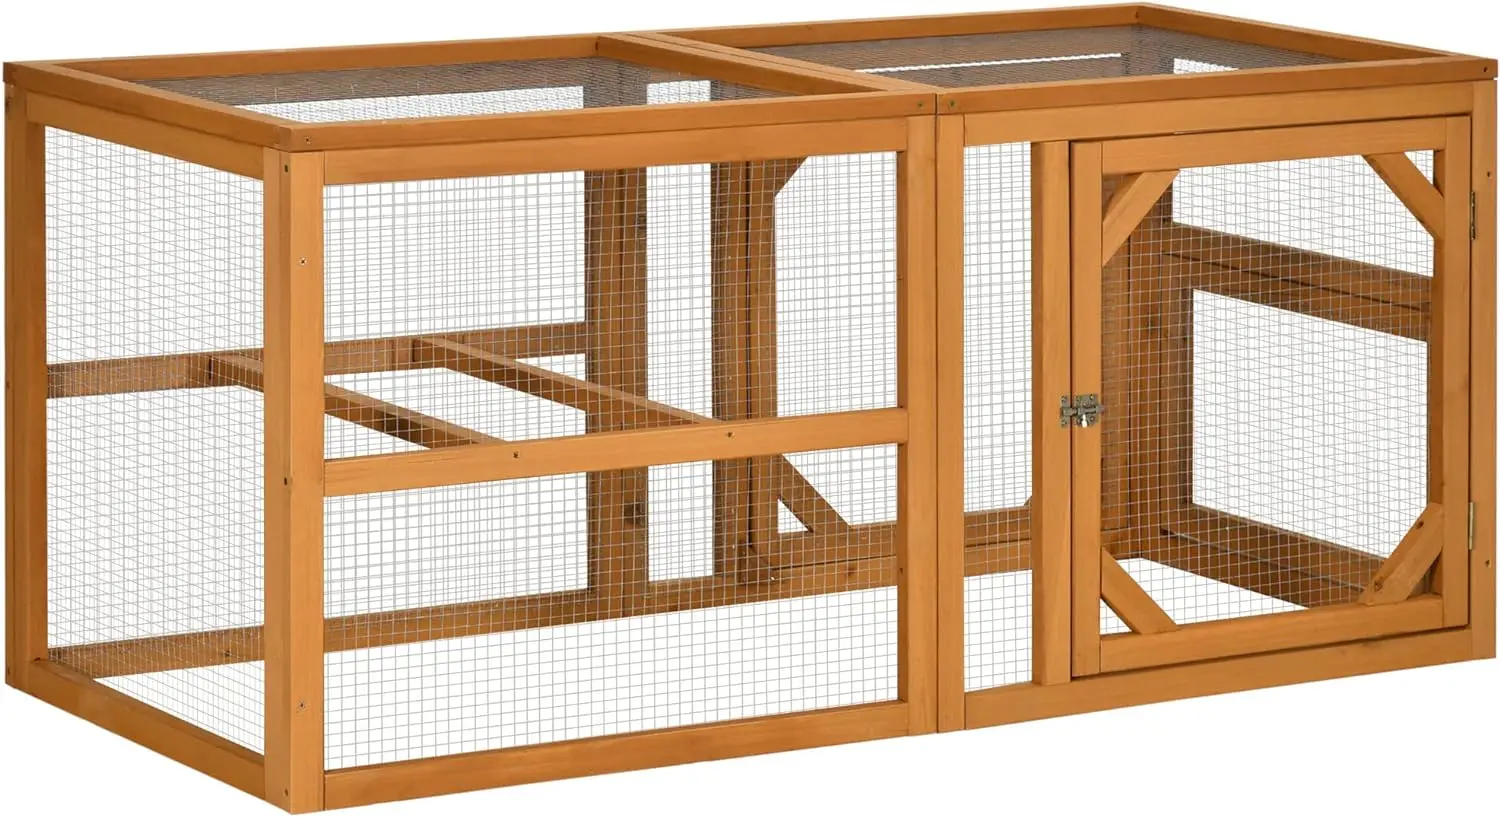 

55" Wooden Chicken Coop Add-on Expansion, Mini Chicken Coop Outdoor Chicken Run Hen House with Combinable Design